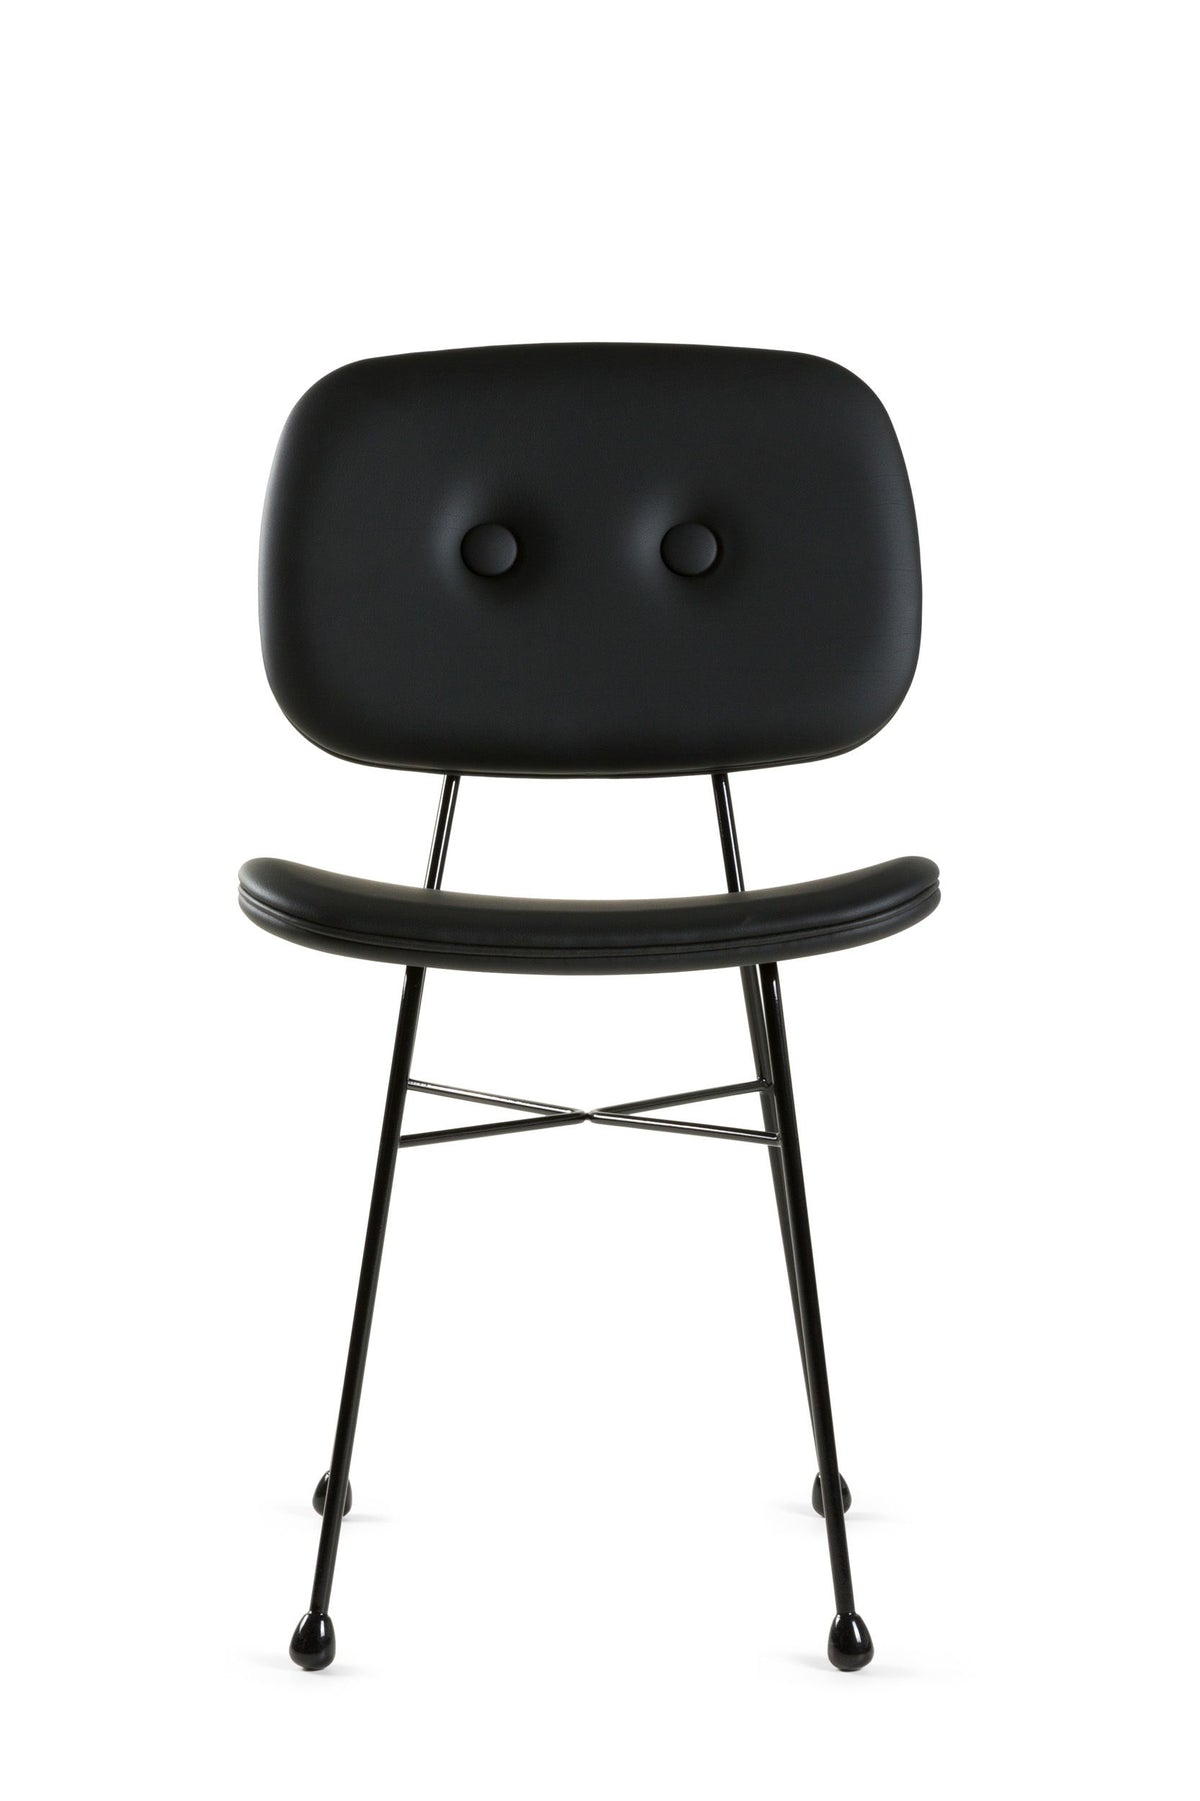 The Golden Chair Black / Upholstered by Moooi